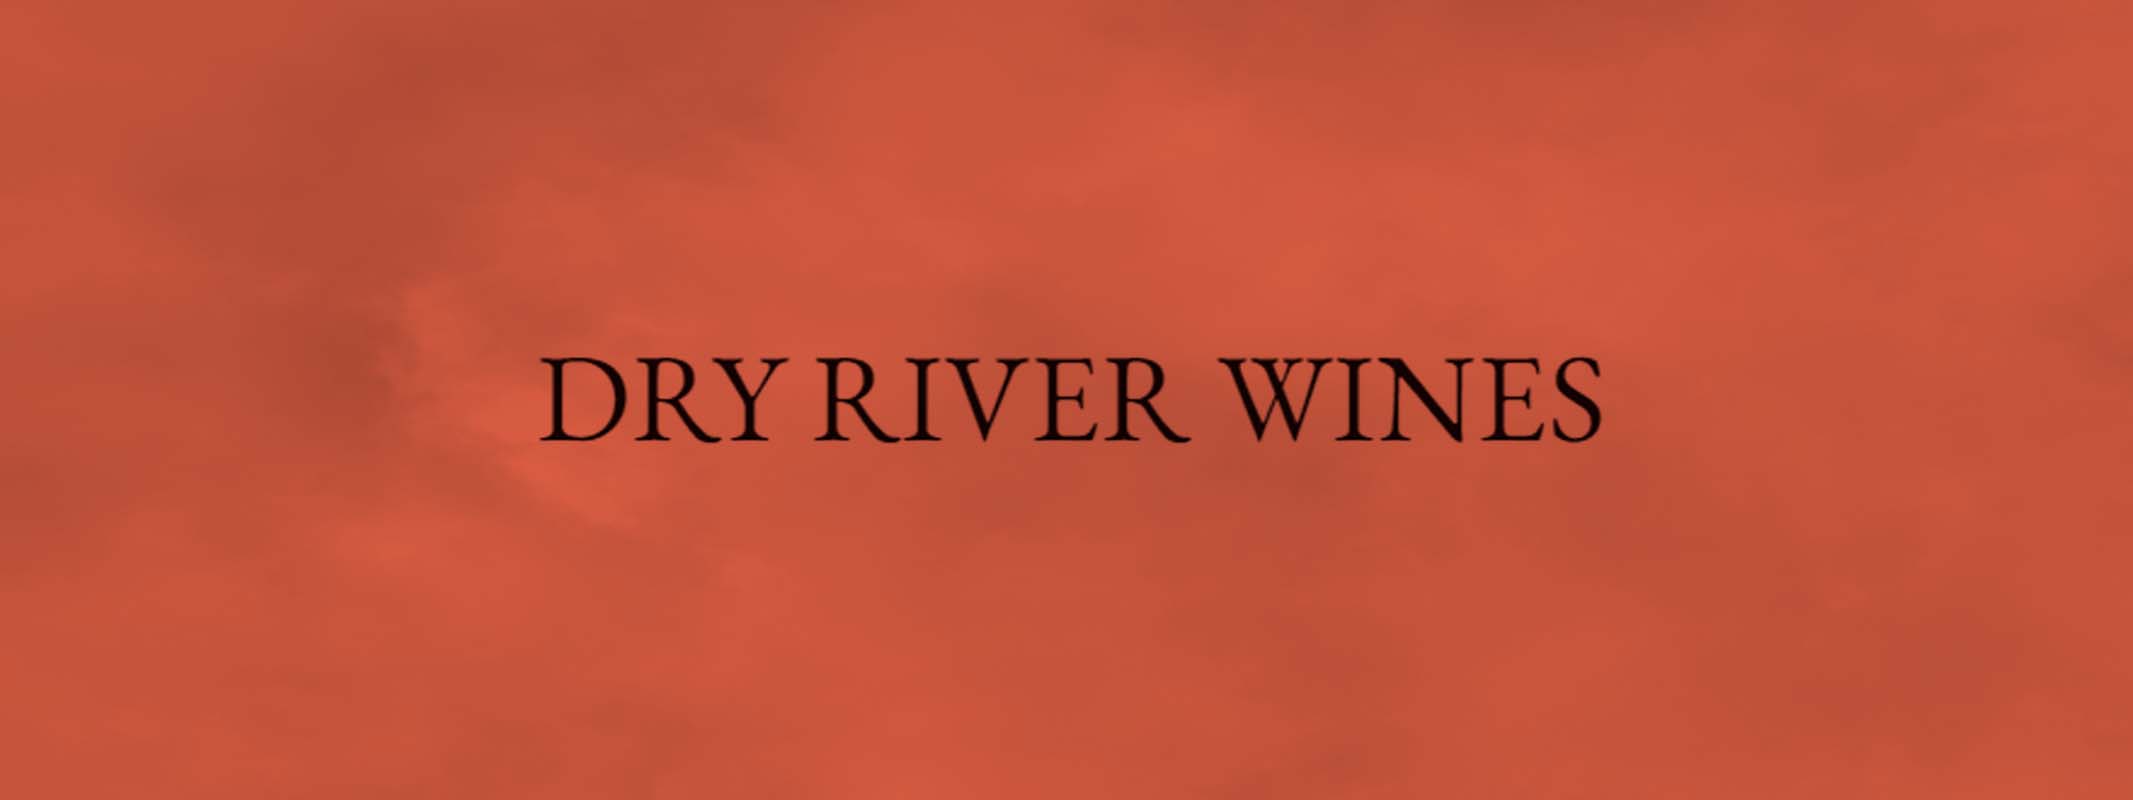 Dry River Wines logo superimposed on a styled background